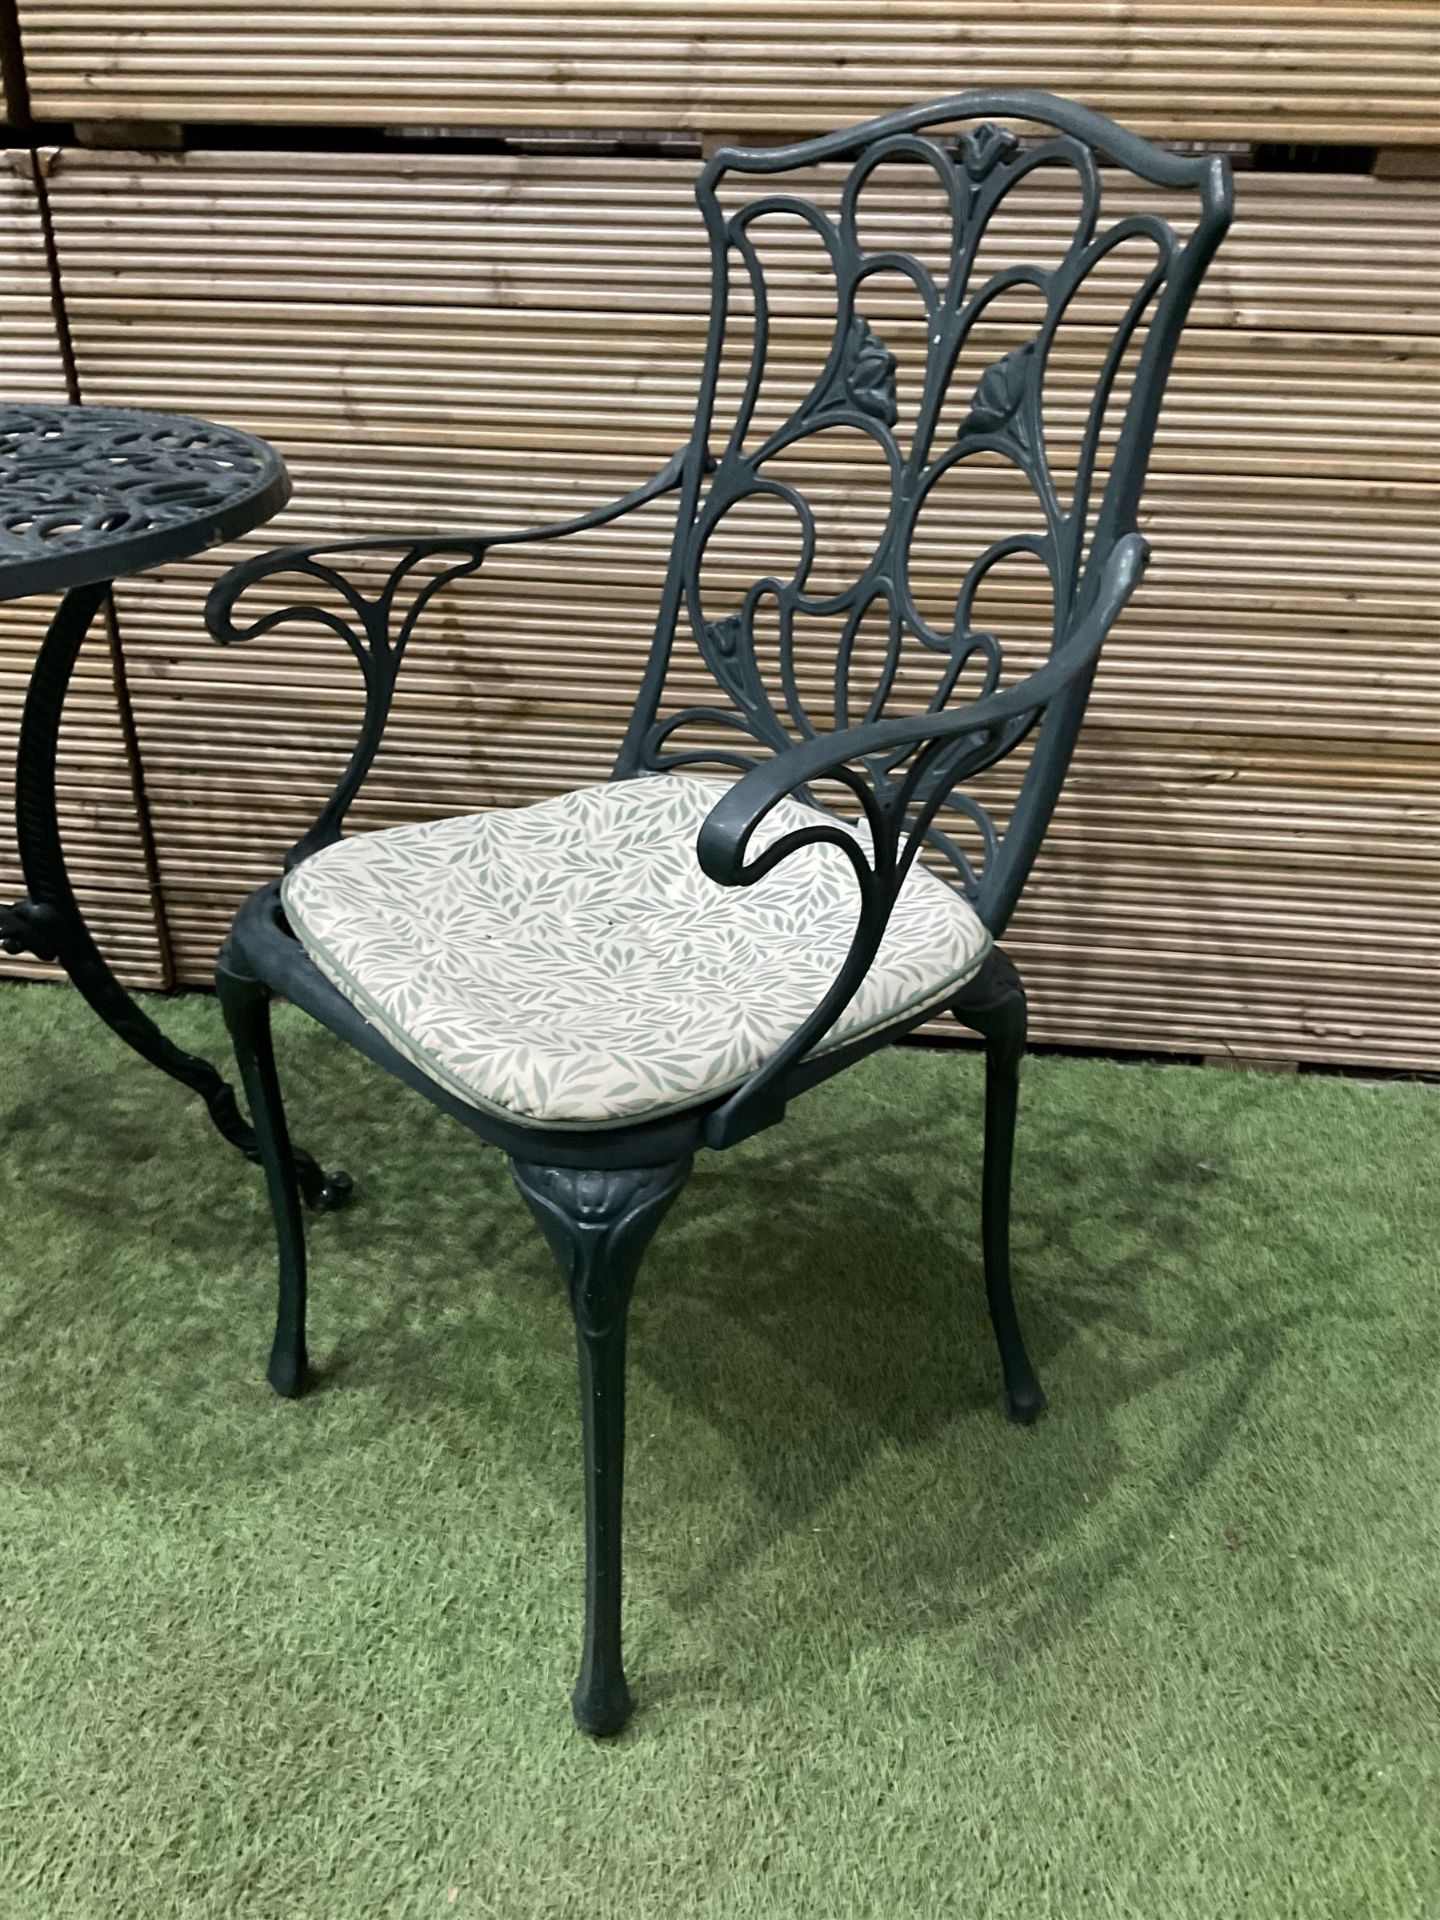 Aluminium garden table and two chairs painted in green - Image 2 of 3